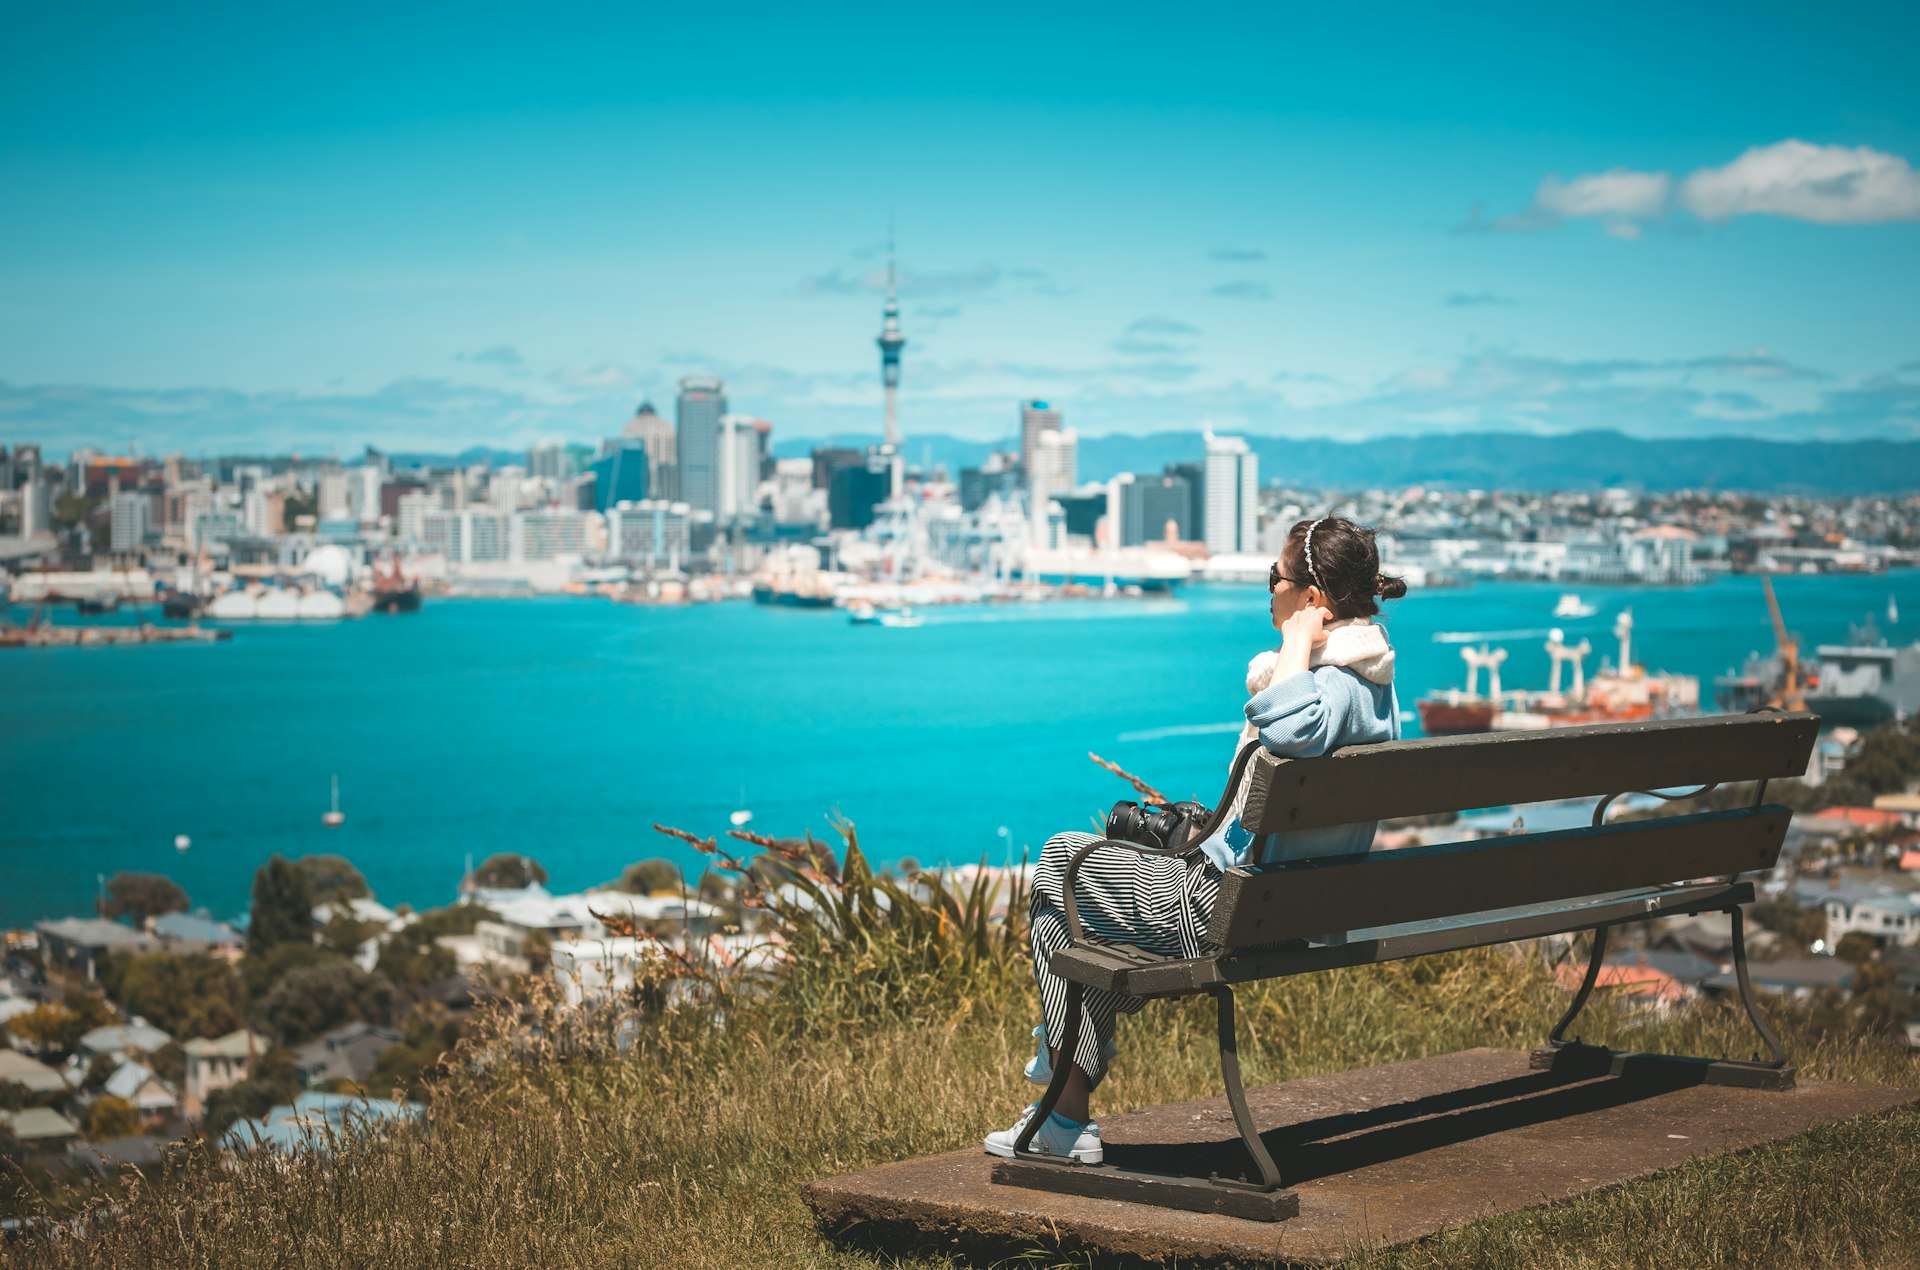 A woman sits on a bench at a viewpoint looking across a body of water towards a city skyline